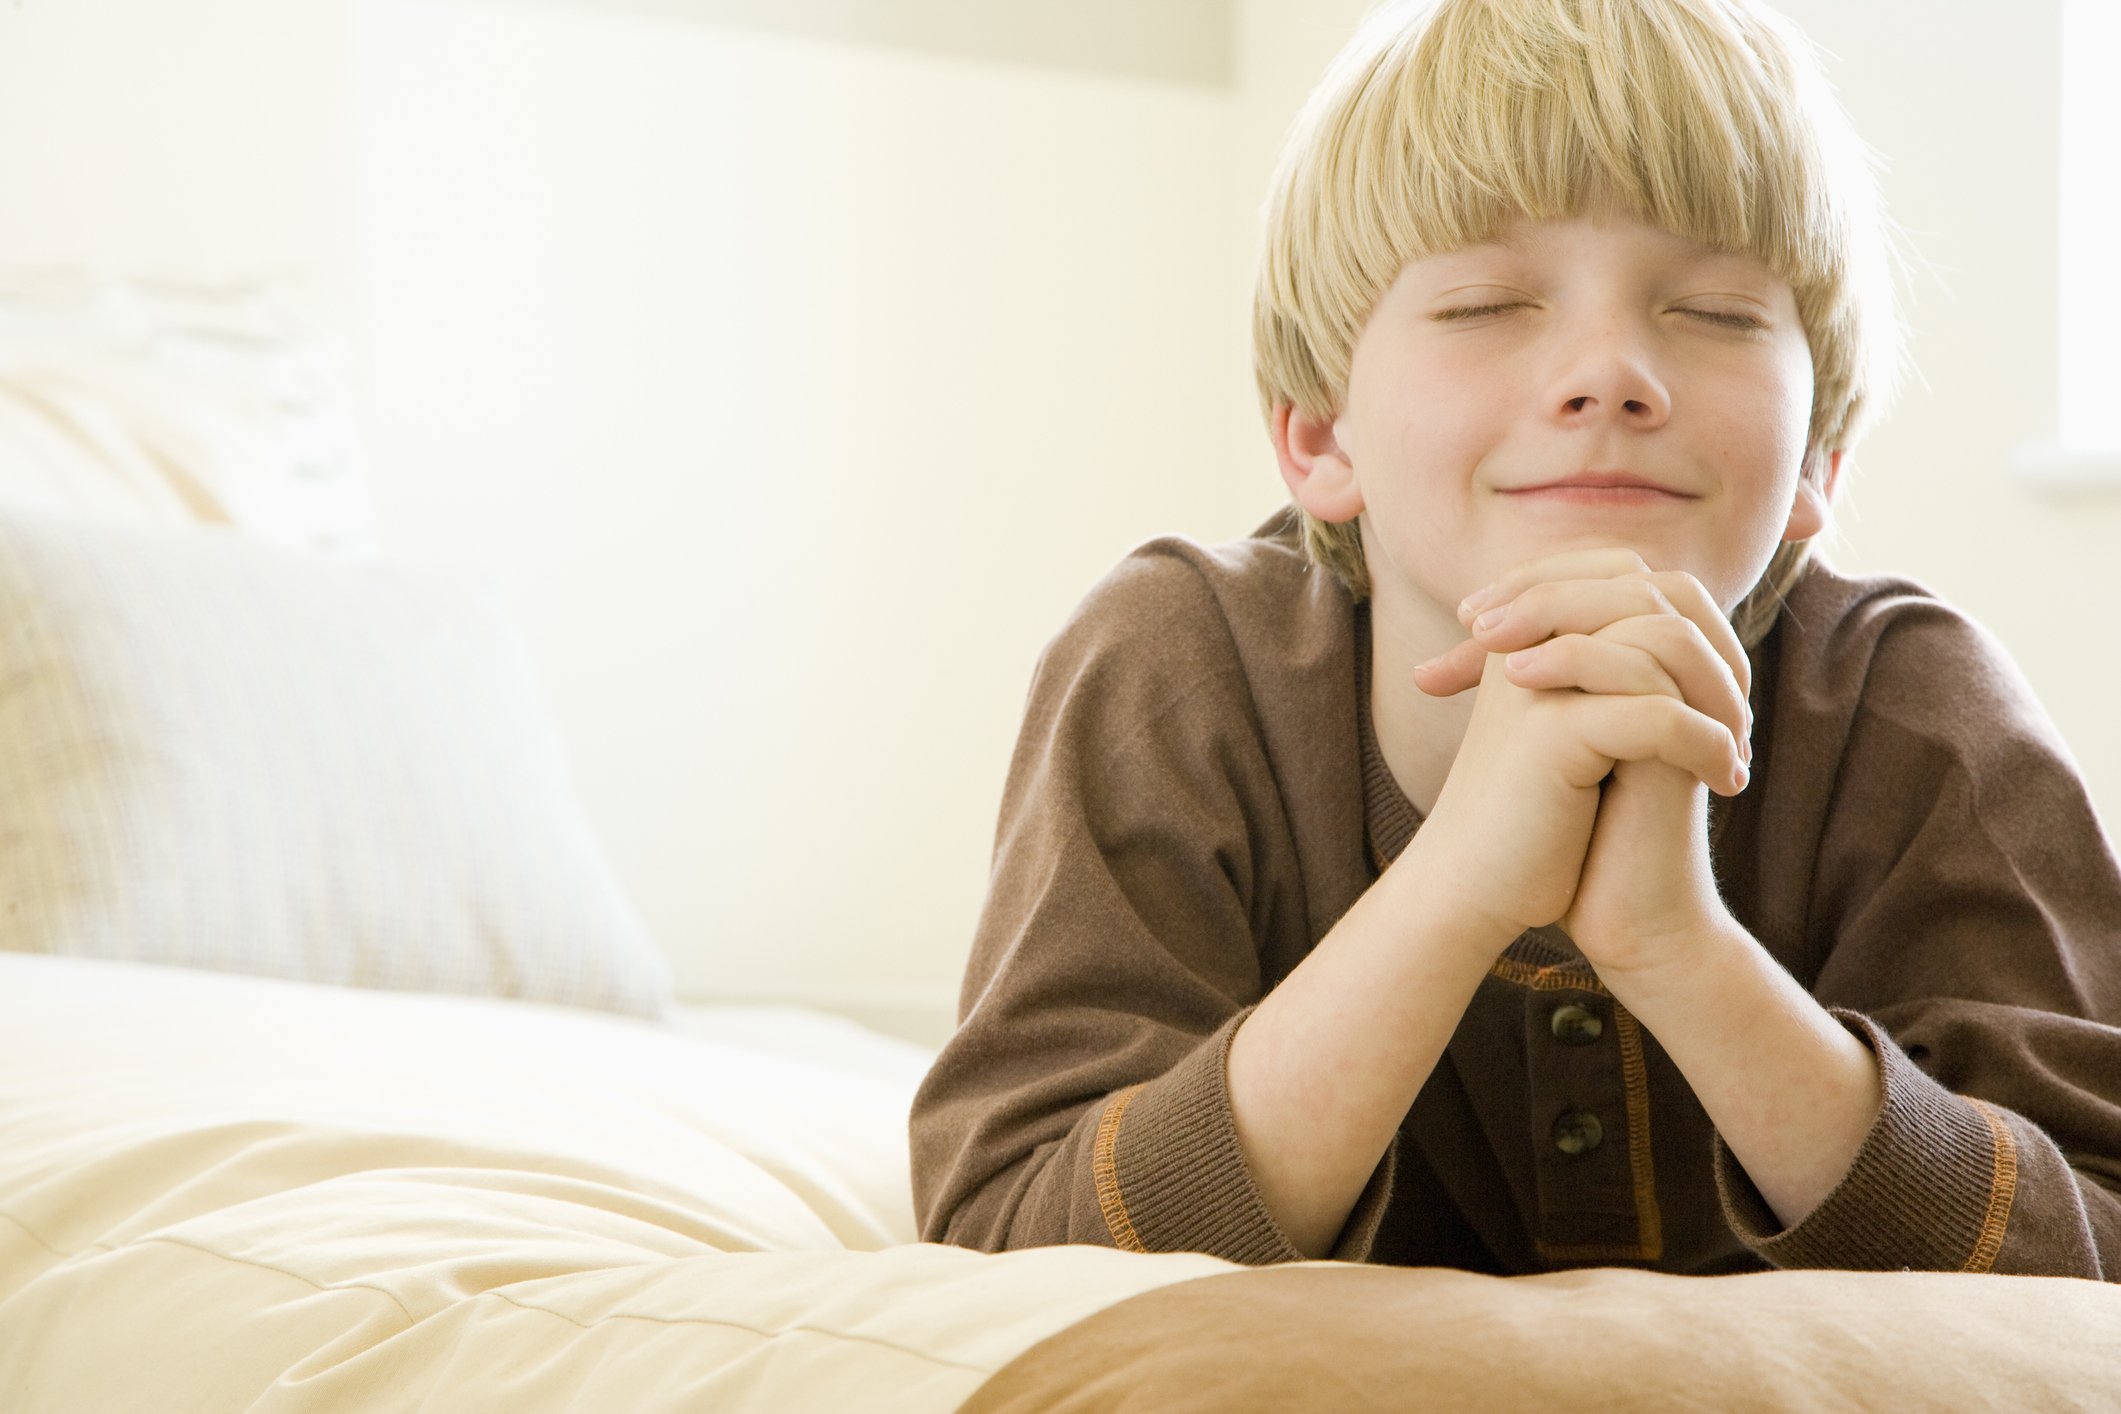 Boy praying before bed |Photo: Getty Images